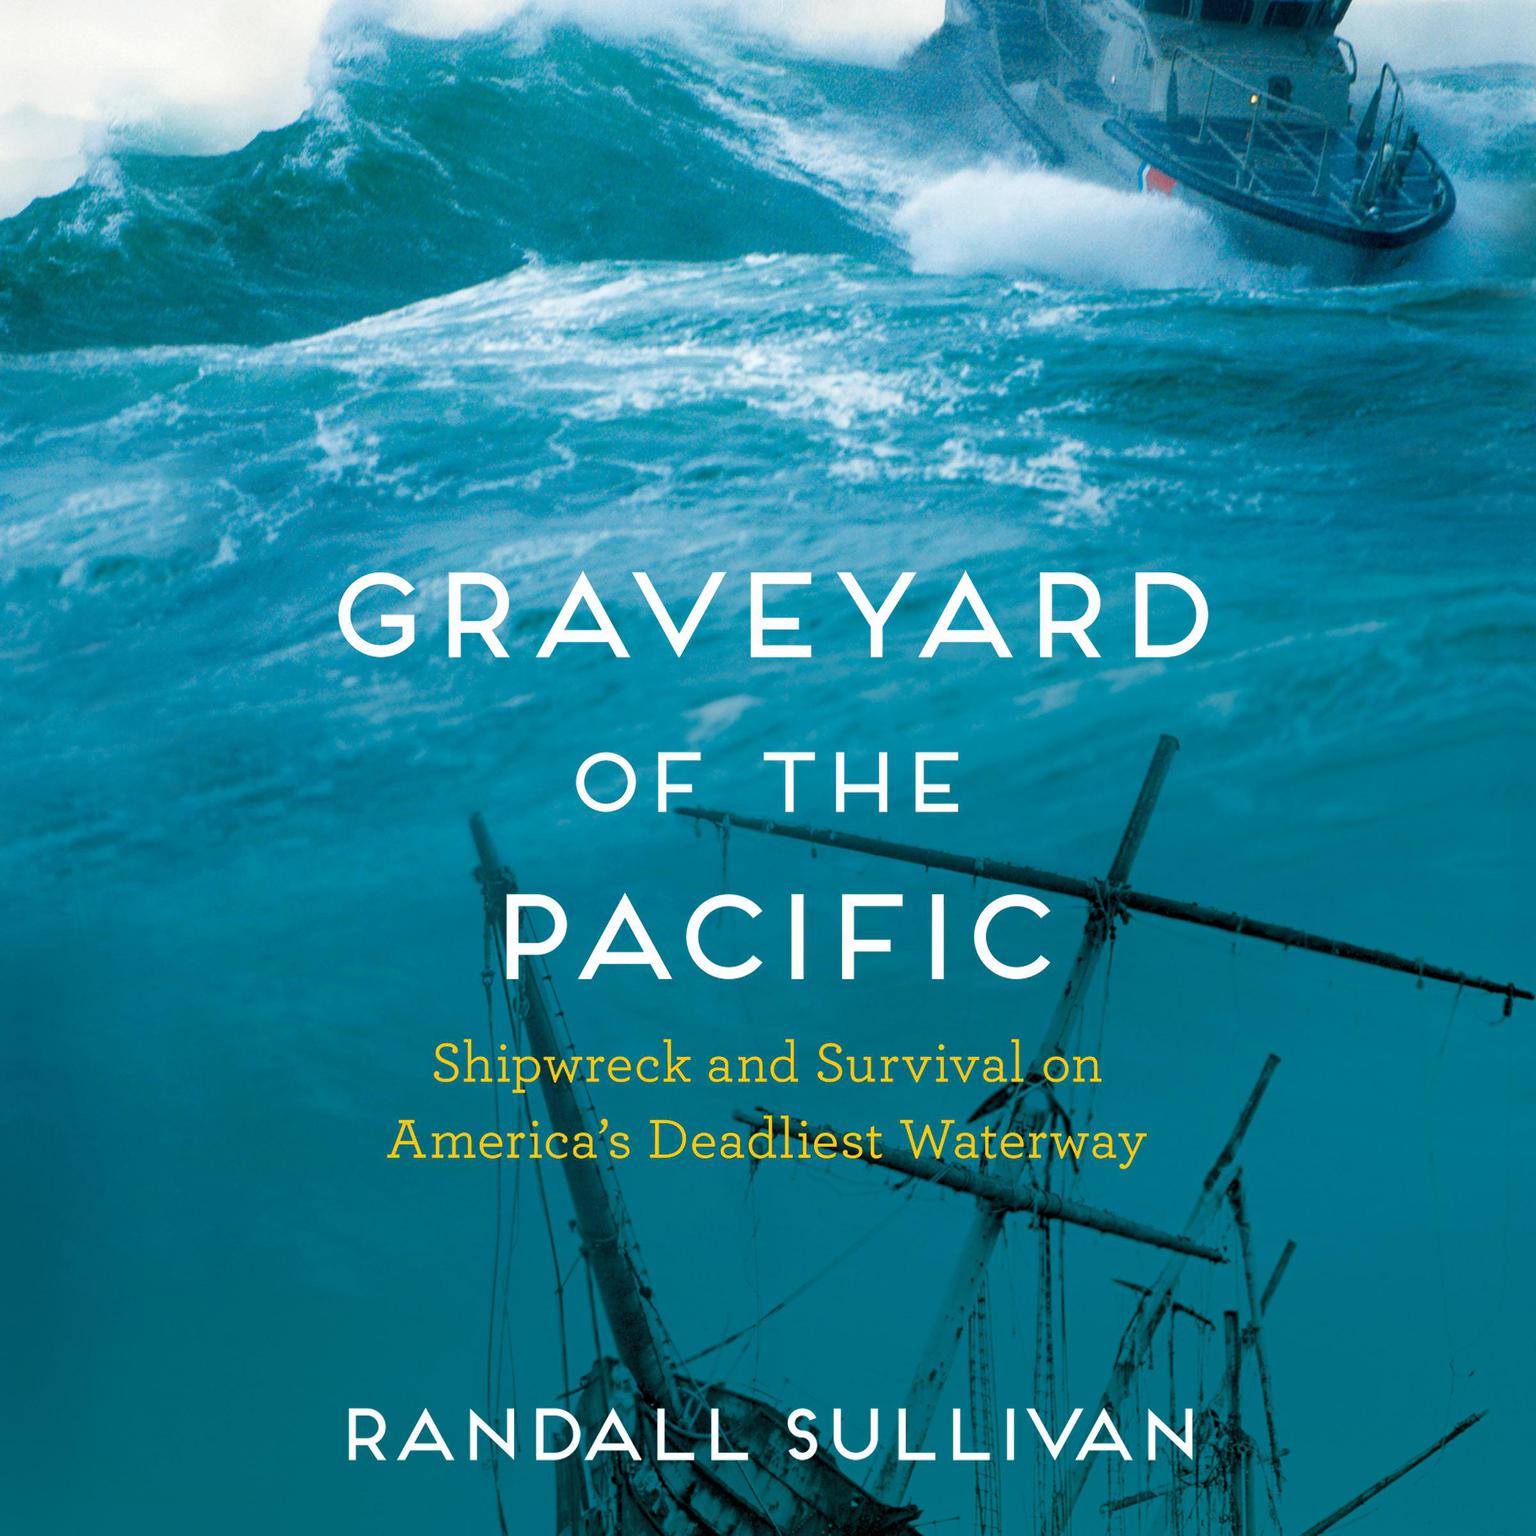 Graveyard of the Pacific: Shipwreck and Survival on America’s Deadliest Waterway Audiobook, by Randall Sullivan